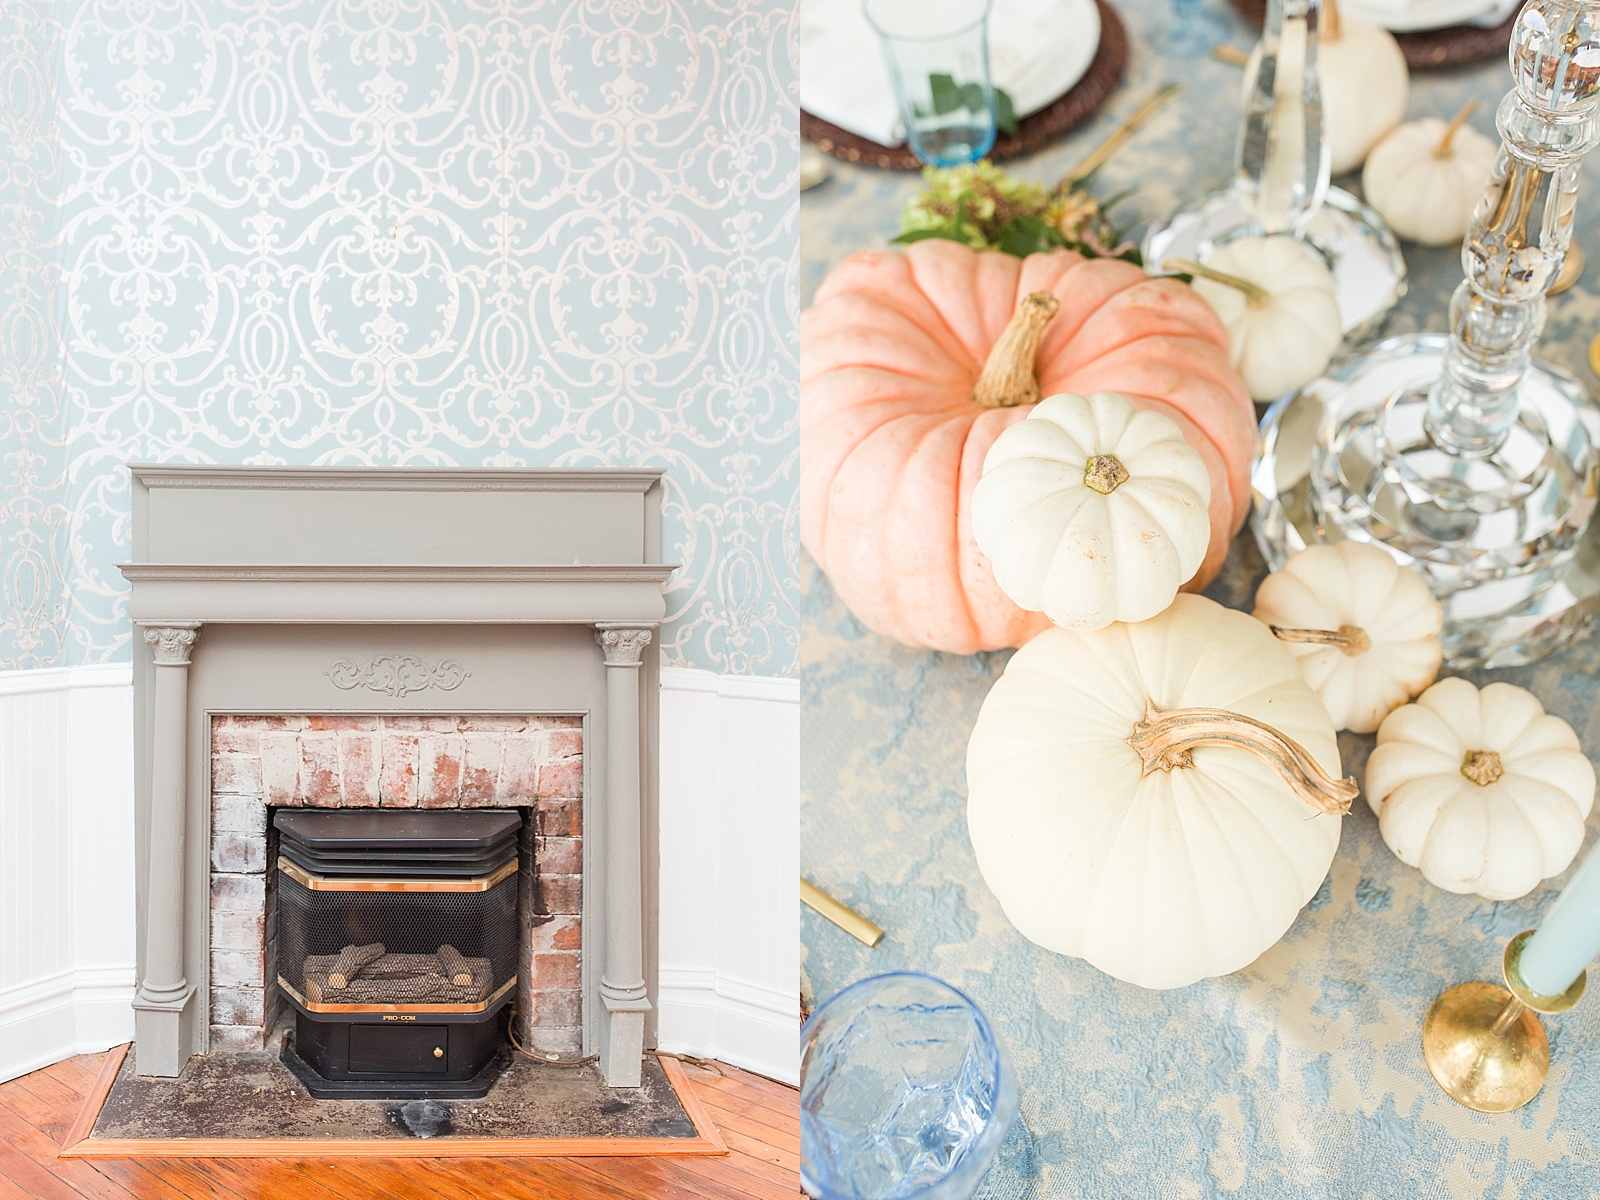 Columbia SC wedding venue detail of fireplace and white pumpkins on reception table photos